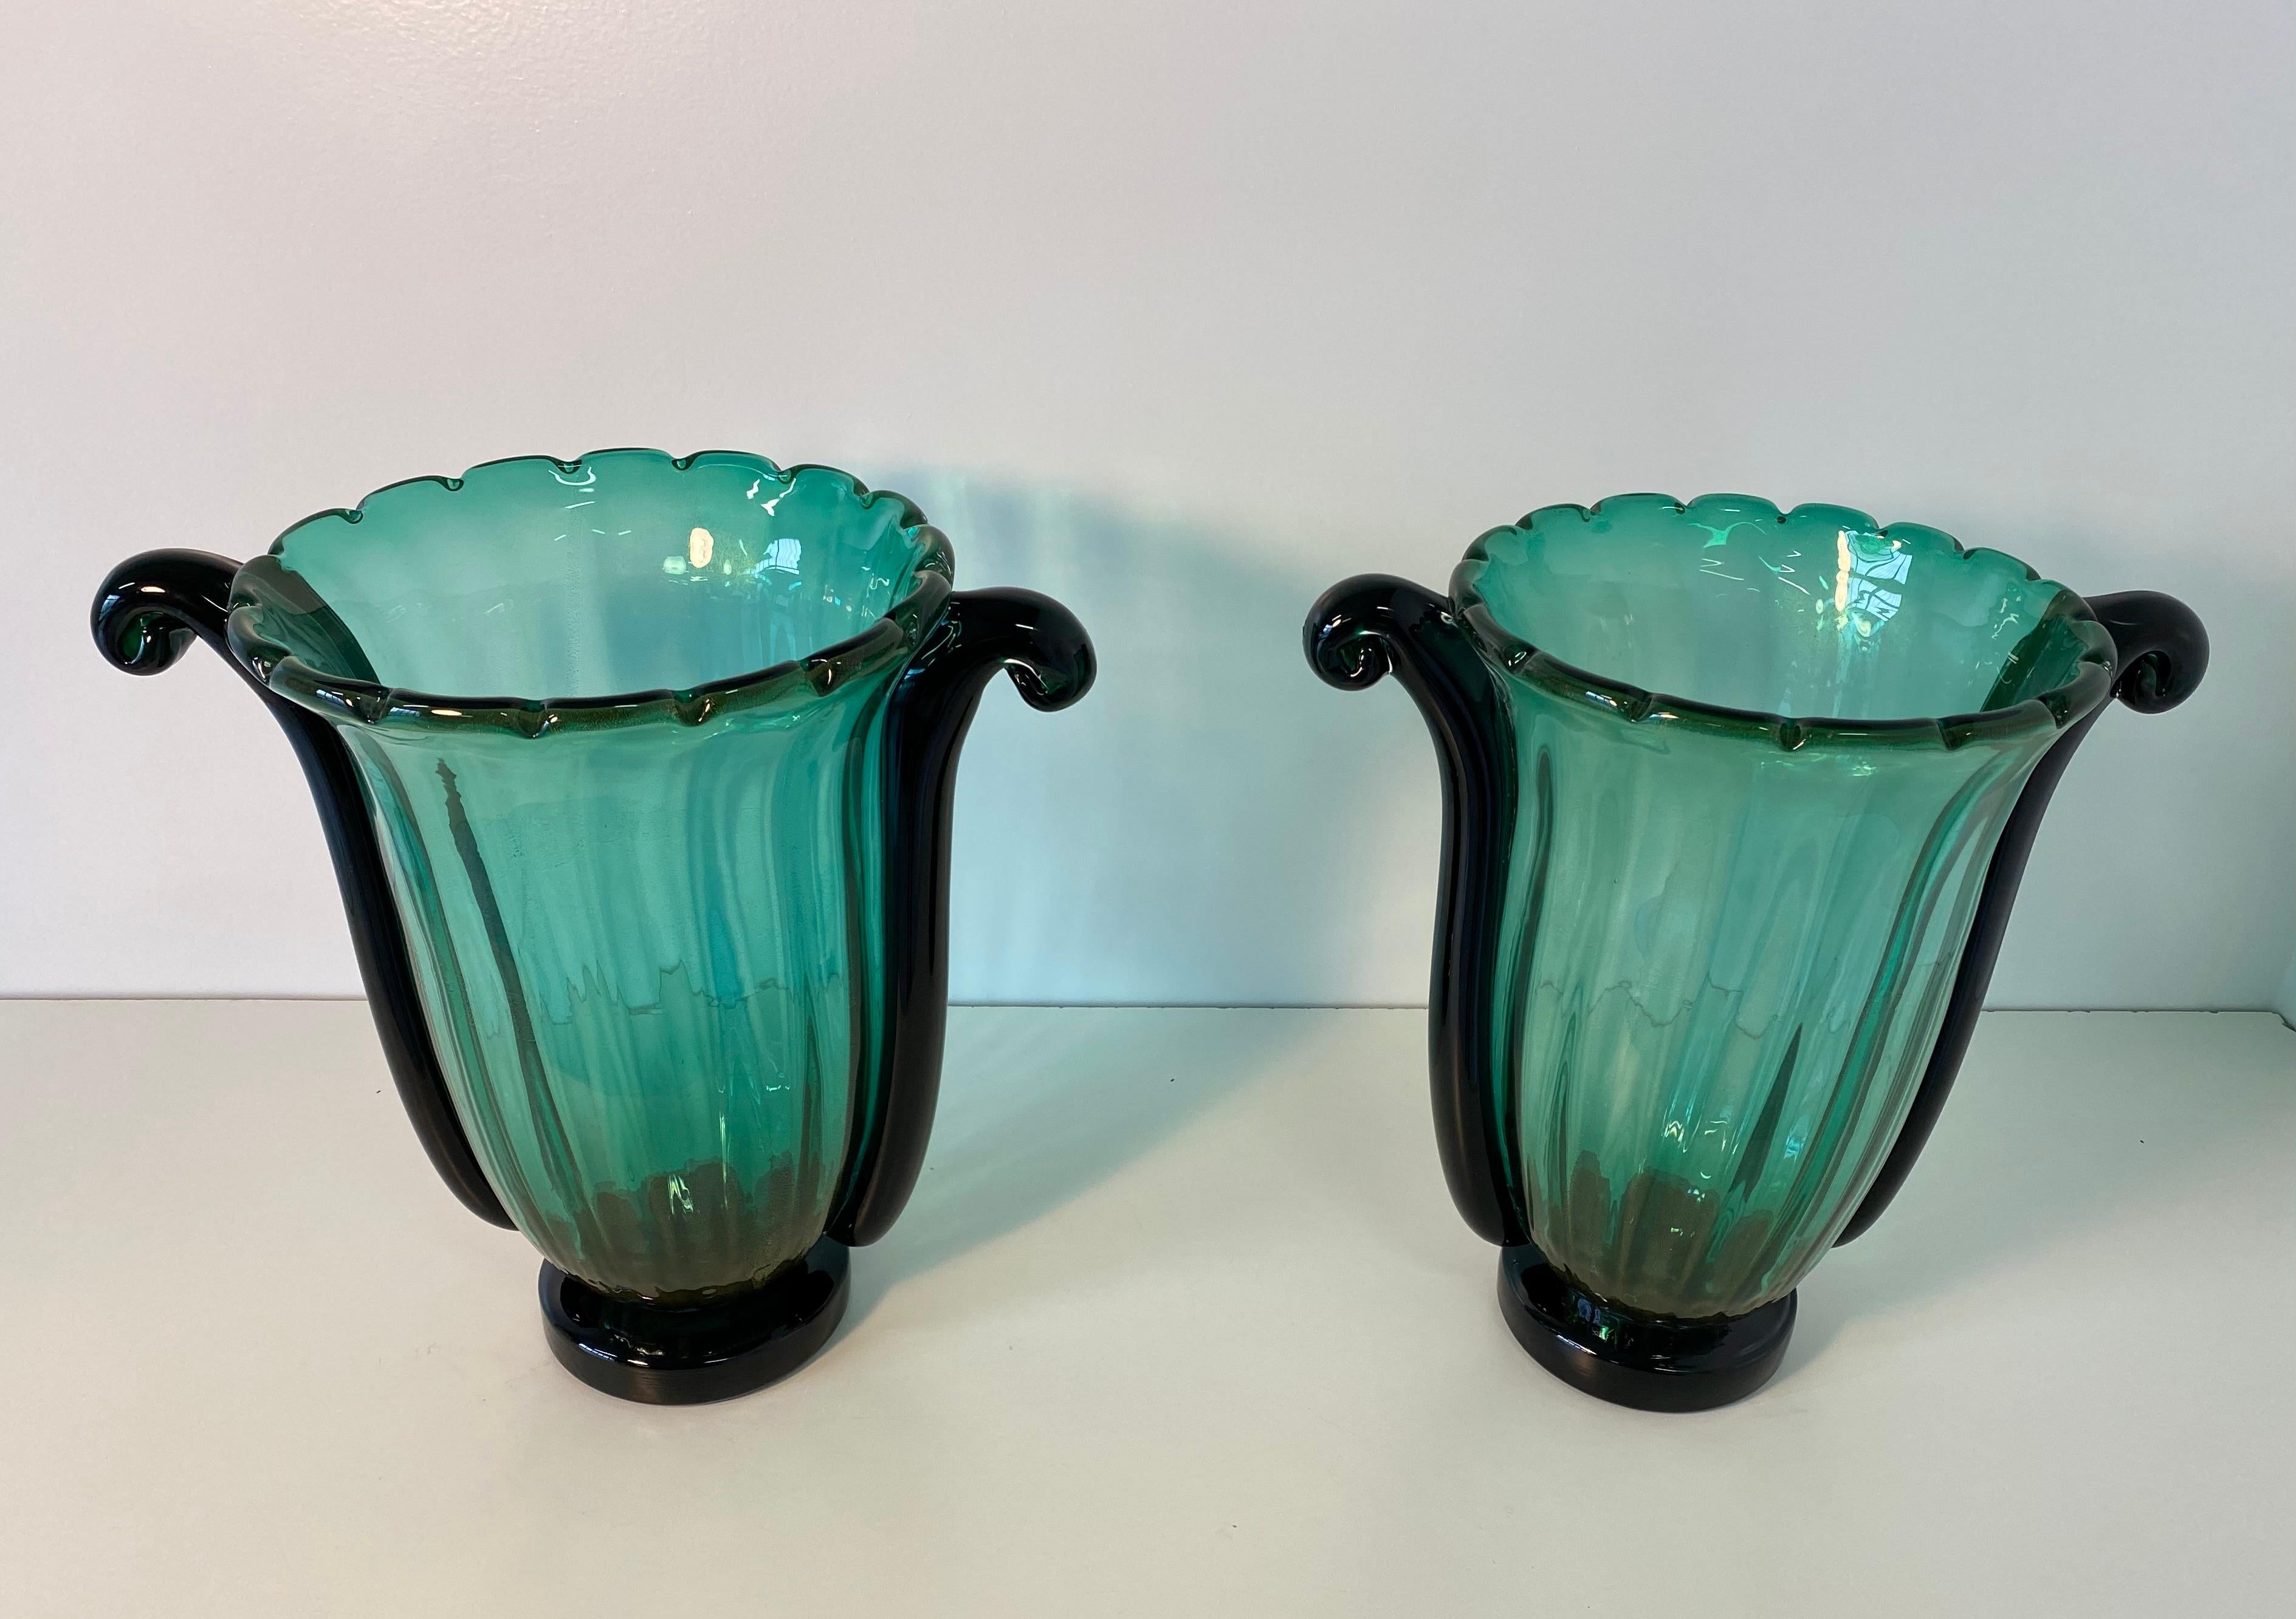 Elegant and rare Art Deco style vases produced in Murano by Cenedese.
They are in green glass with shades of gold leaf inside while the base and the two side parts are in black glass.